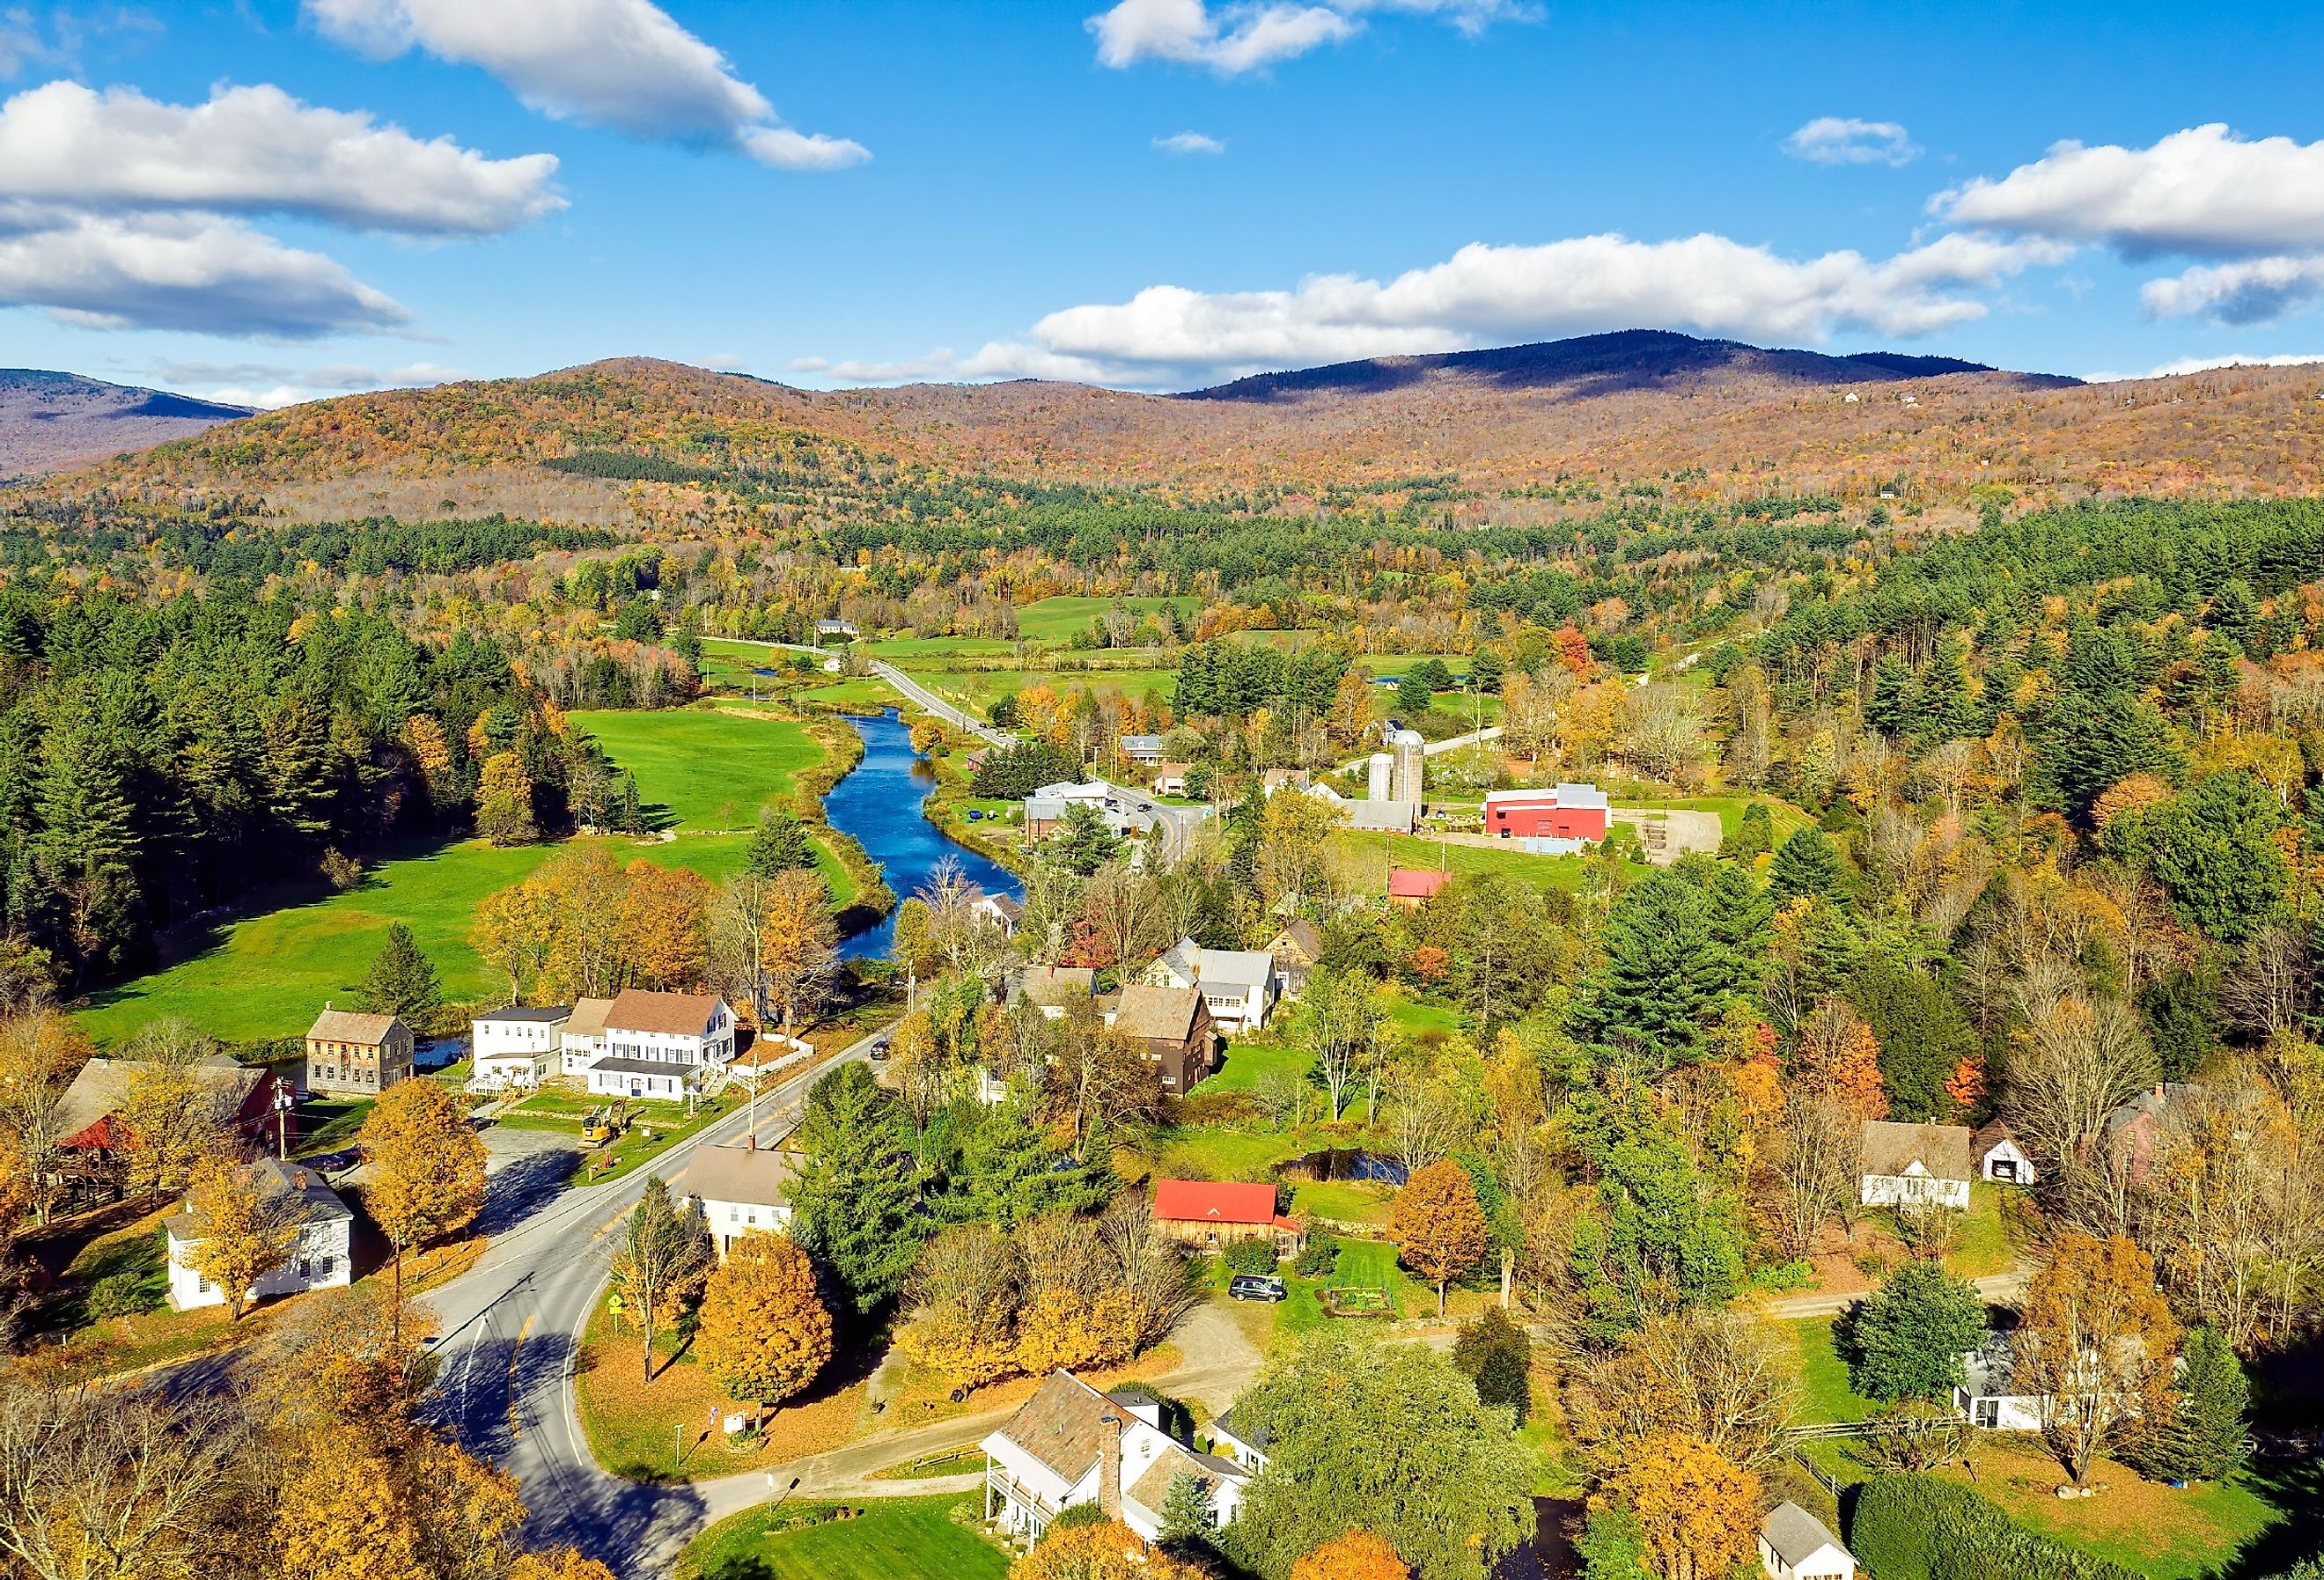 Overlooking the small town of Weston in autumn. Image credit John Couture via Shutterstock.